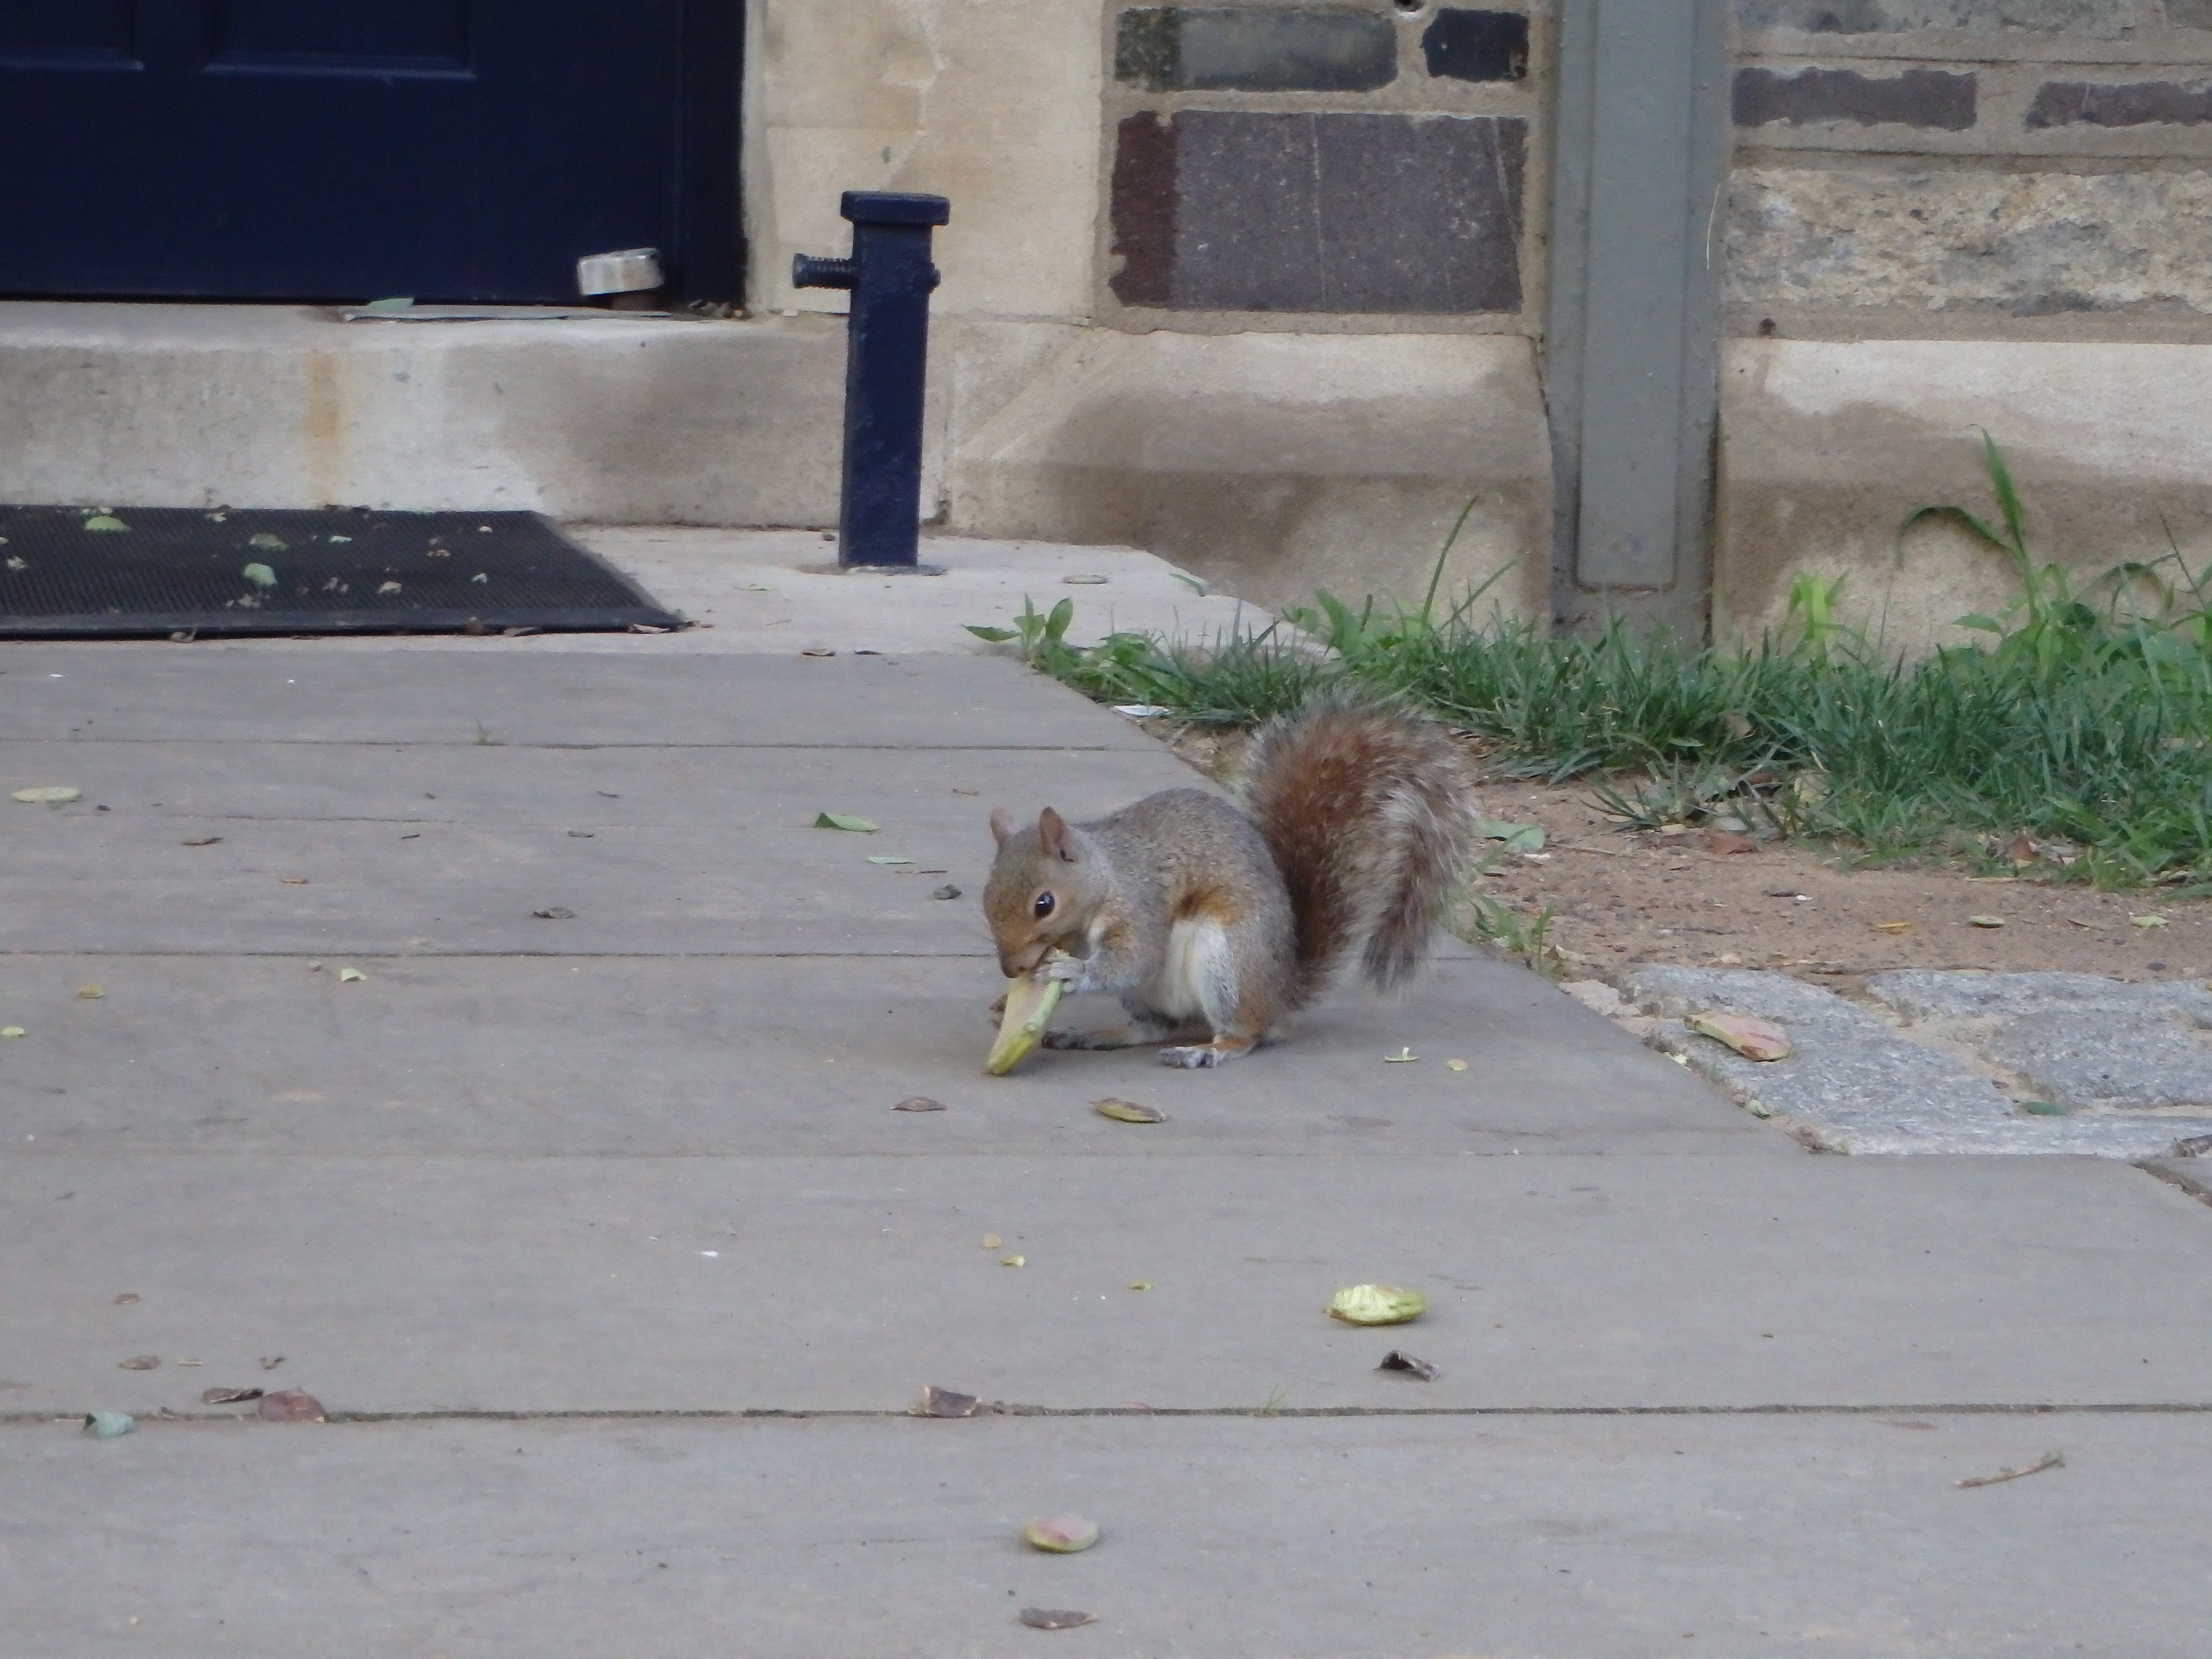 A squirrel eats on a Princeton walkway